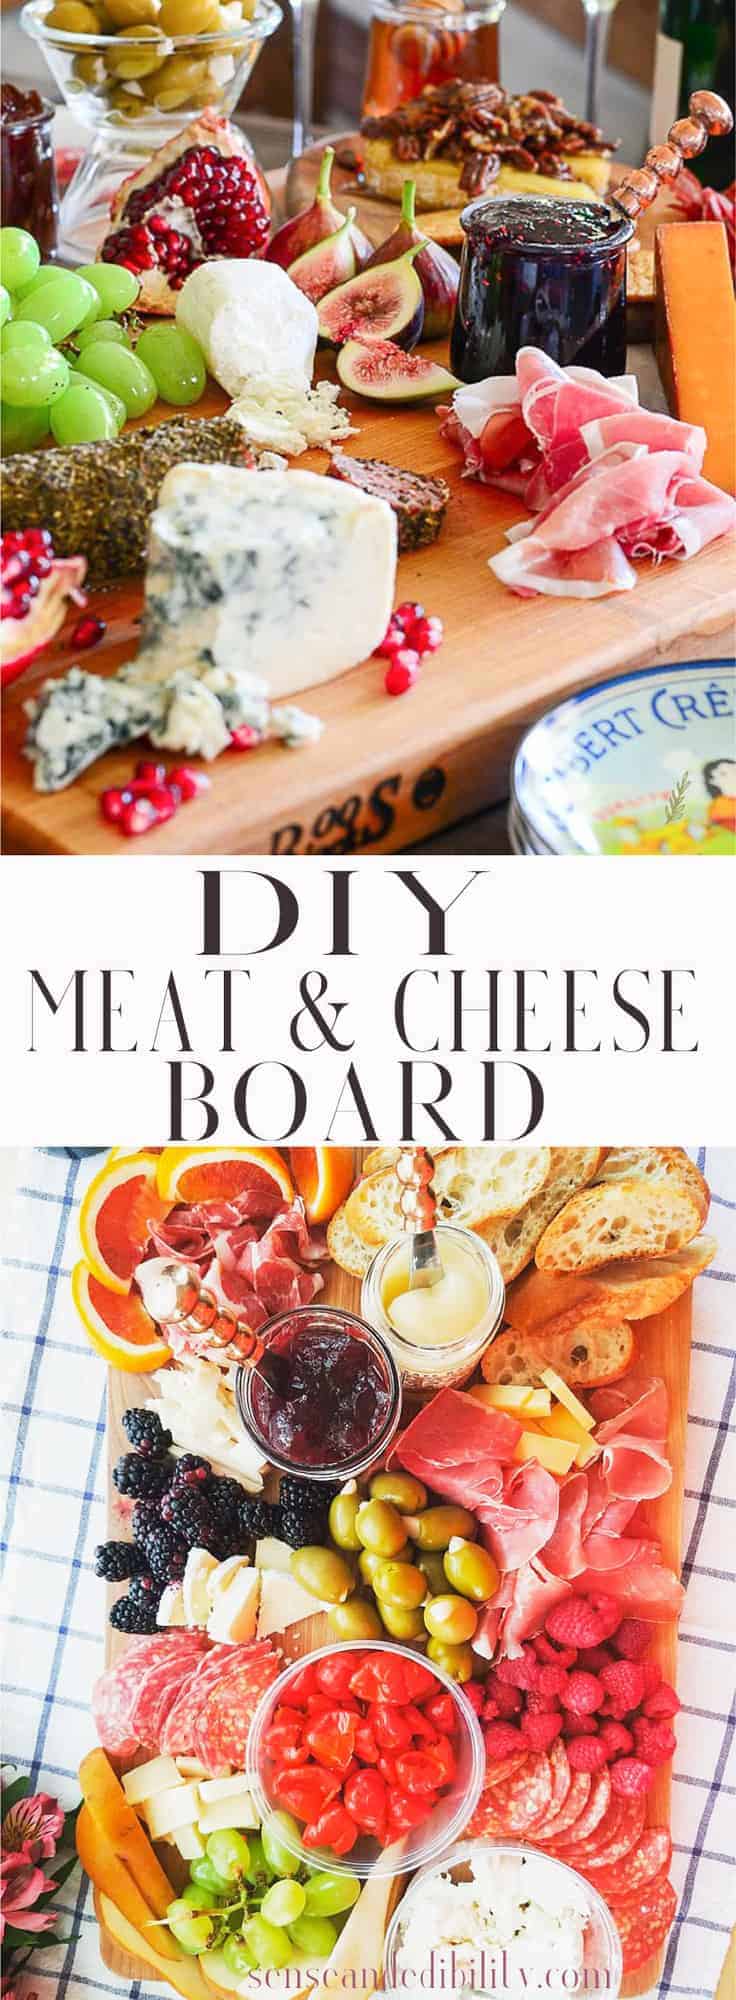 Sense & Edibility's DIY Meat and Cheese Board